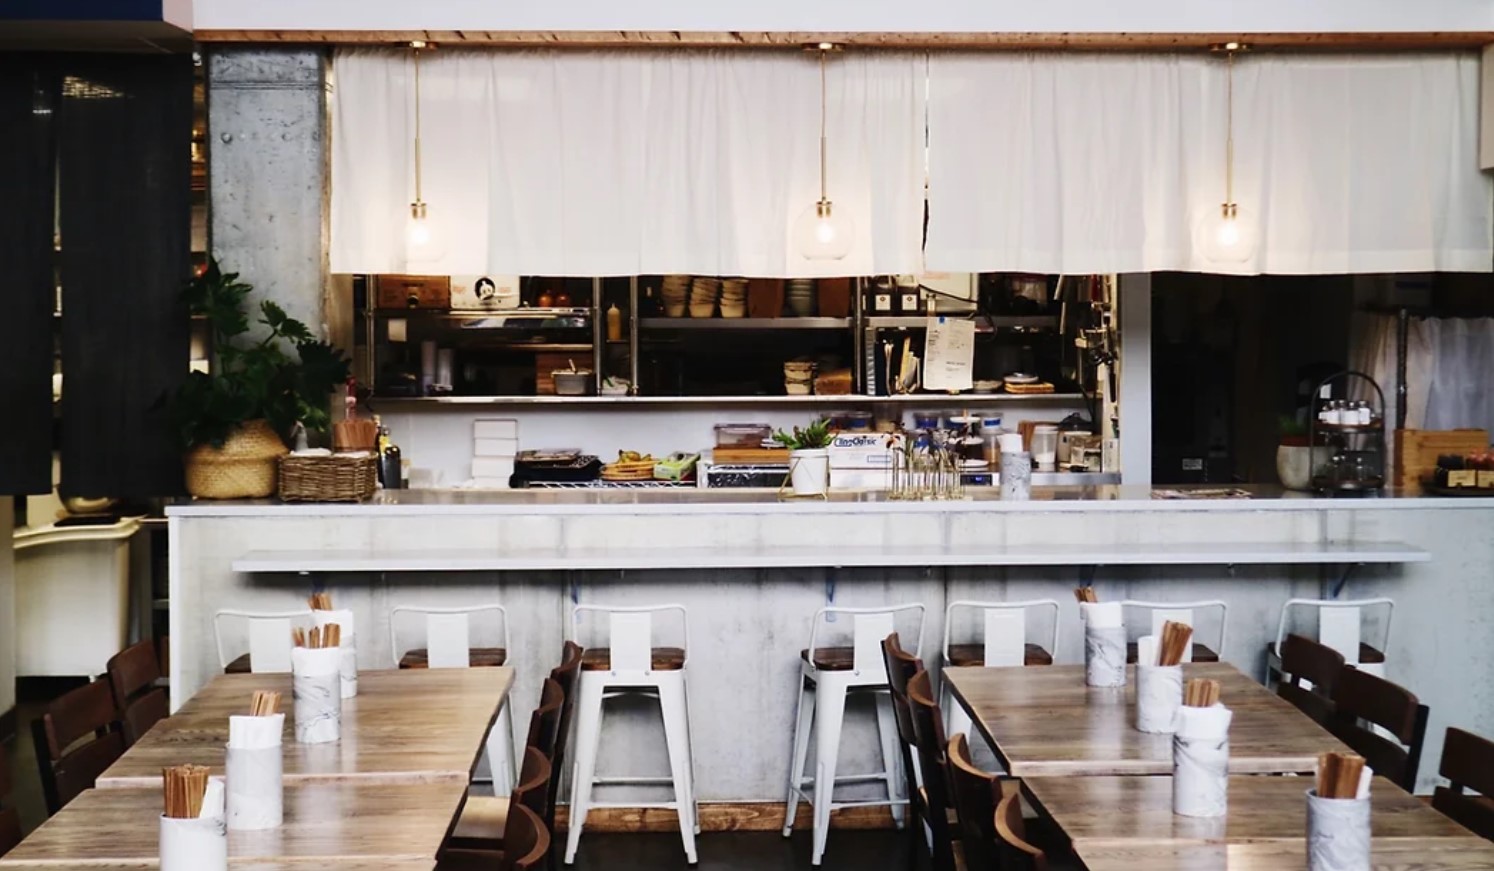 A new Asian-inspired restaurant called Lucky Star will open in Atlanta’s Star Metals District early next year in a space that will feature a casual café and bar. Above, a photo of Momonoki's counter and seating area.